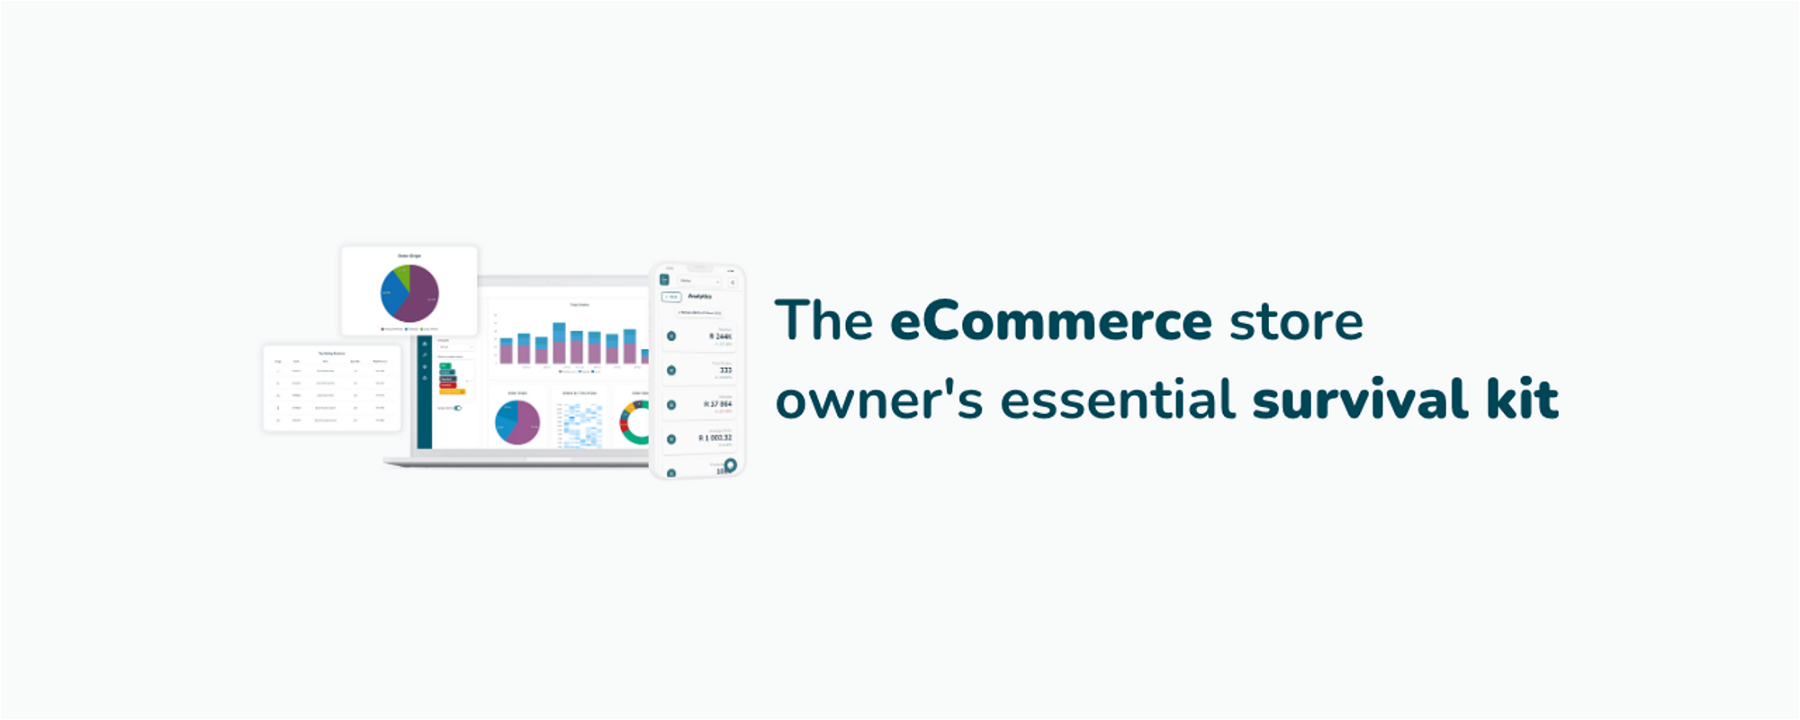 The eCommerce store owner's essential survival kit